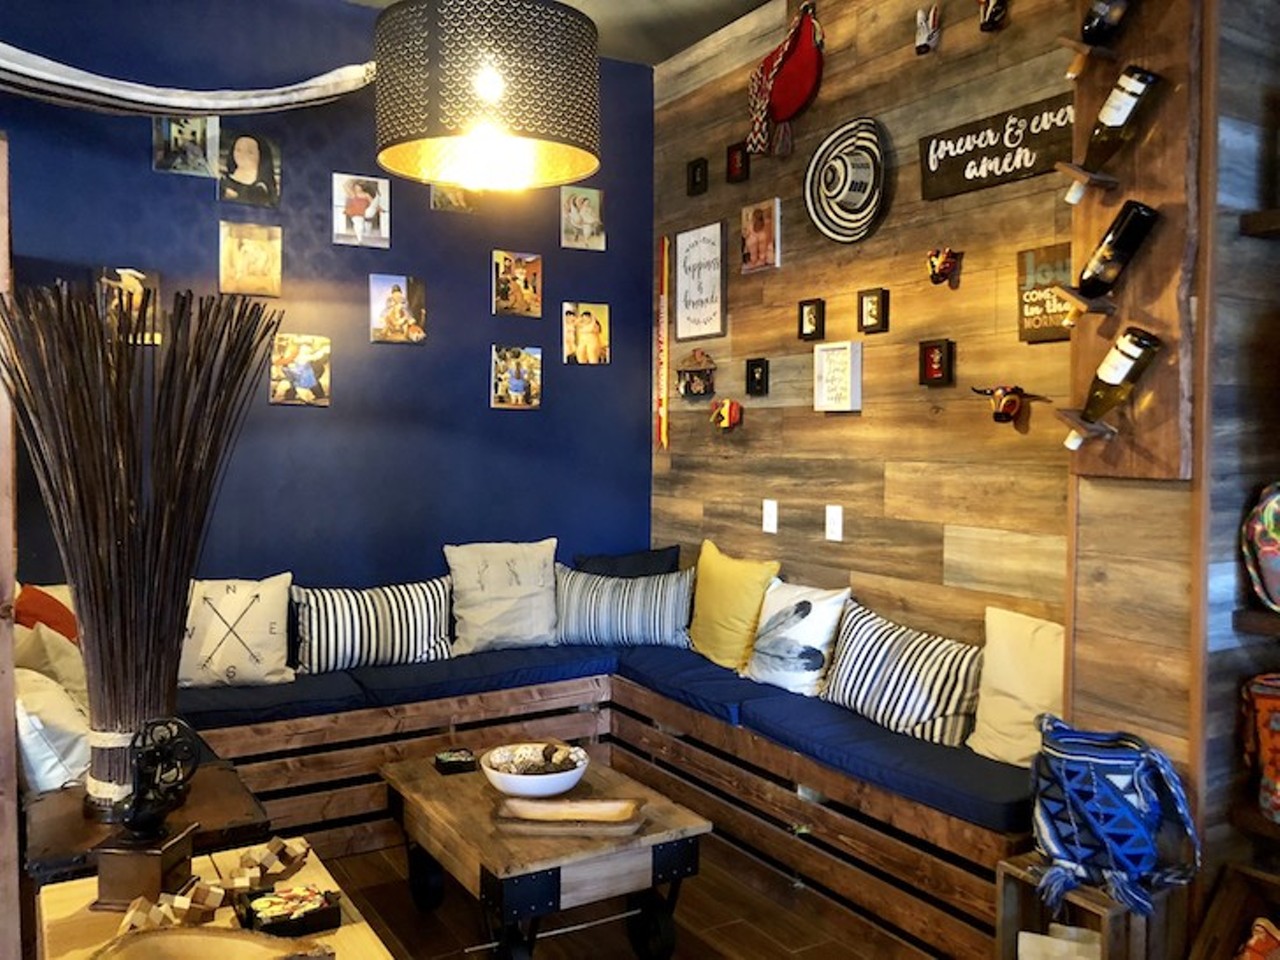 CFS Coffee  
430 W. New England Ave., 407-637-2335; also 54 W. Church St., 407-776-2900
Opened in 2016, this Winter Park coffee shop brings Columbian coffee to Orlando. While sipping on worldwide flavors, enjoy one of their homemade arepas. 
Photo by Monivette Cordeiro